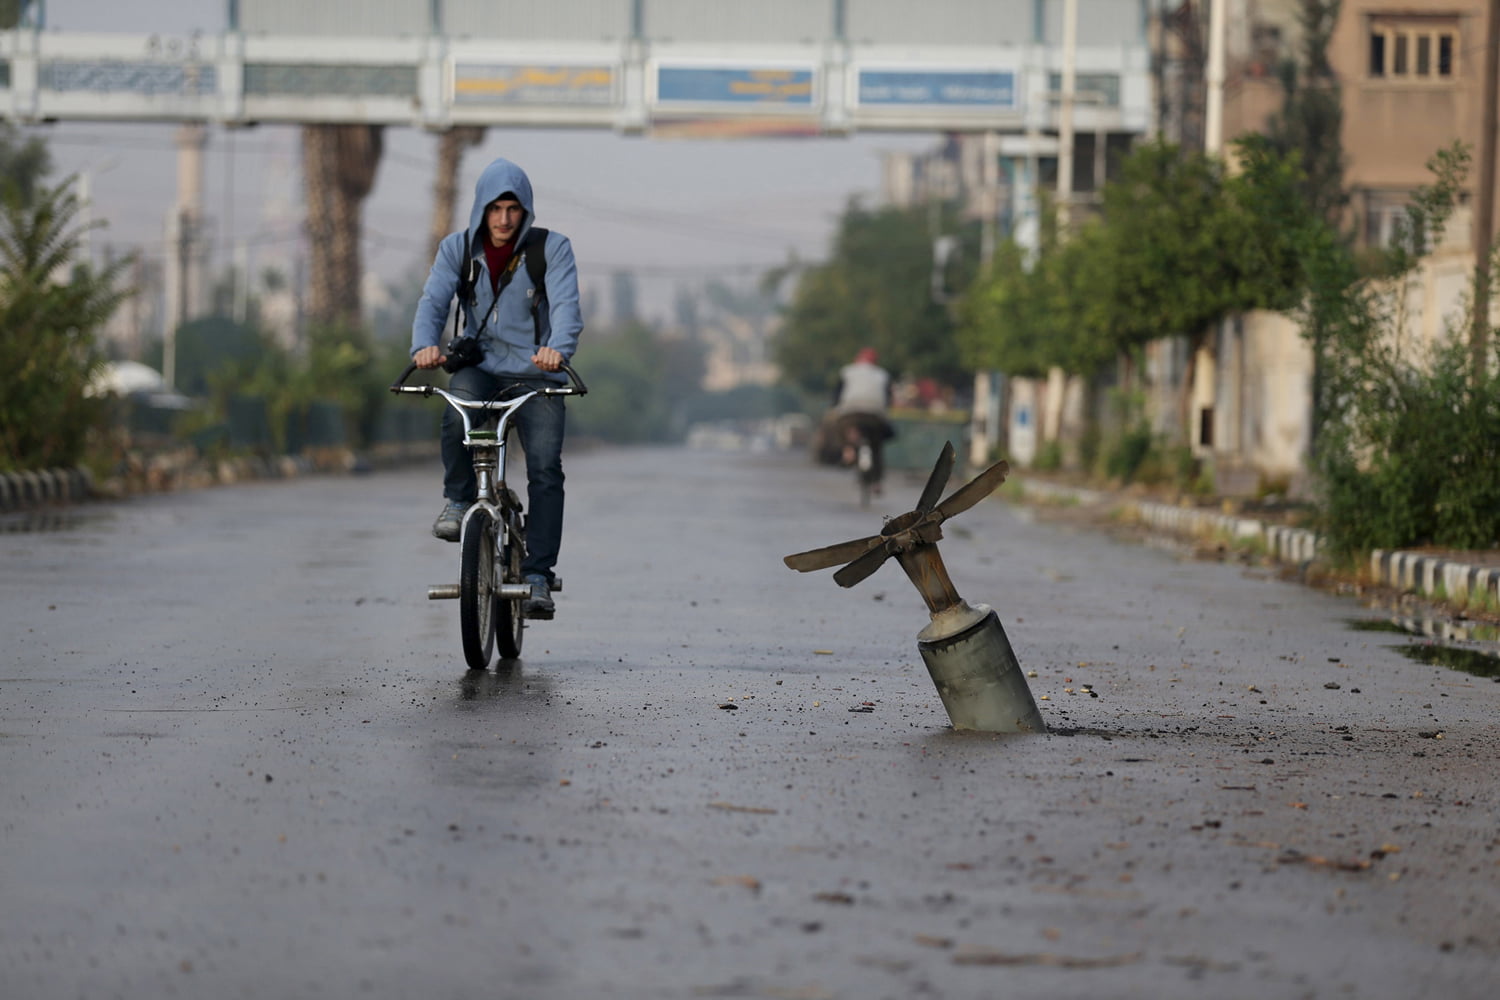 A resident rides his bicycle near what activists said was an  exploded cluster bomb shell in the town of Douma, eastern Ghouta in Damascus